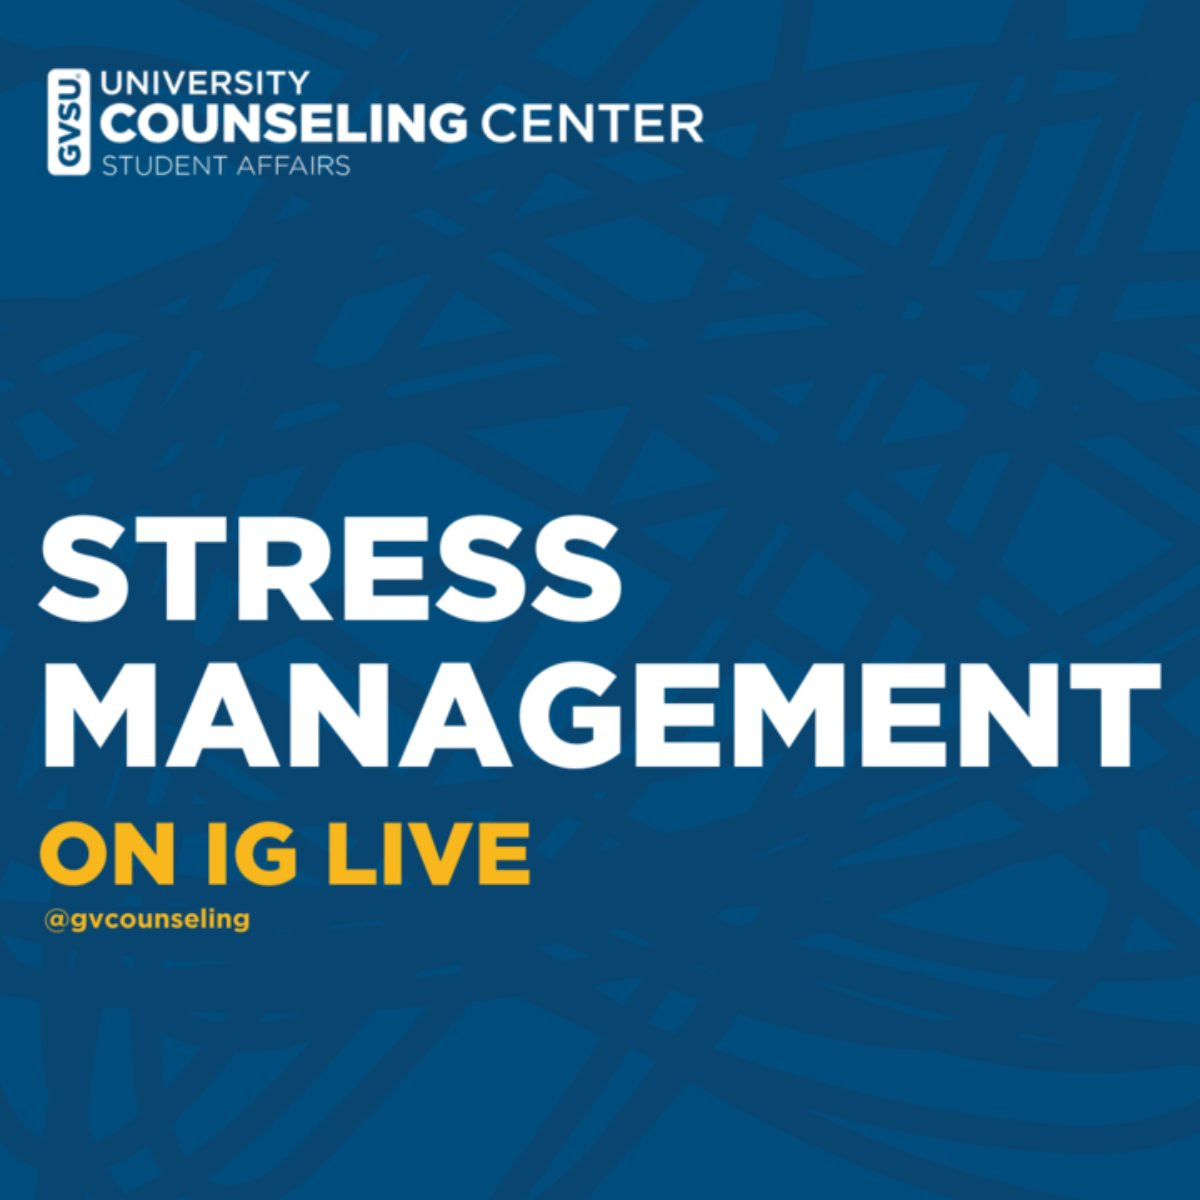 A blue graphic with text that reads Stress Management on IG Live @gvcounseling